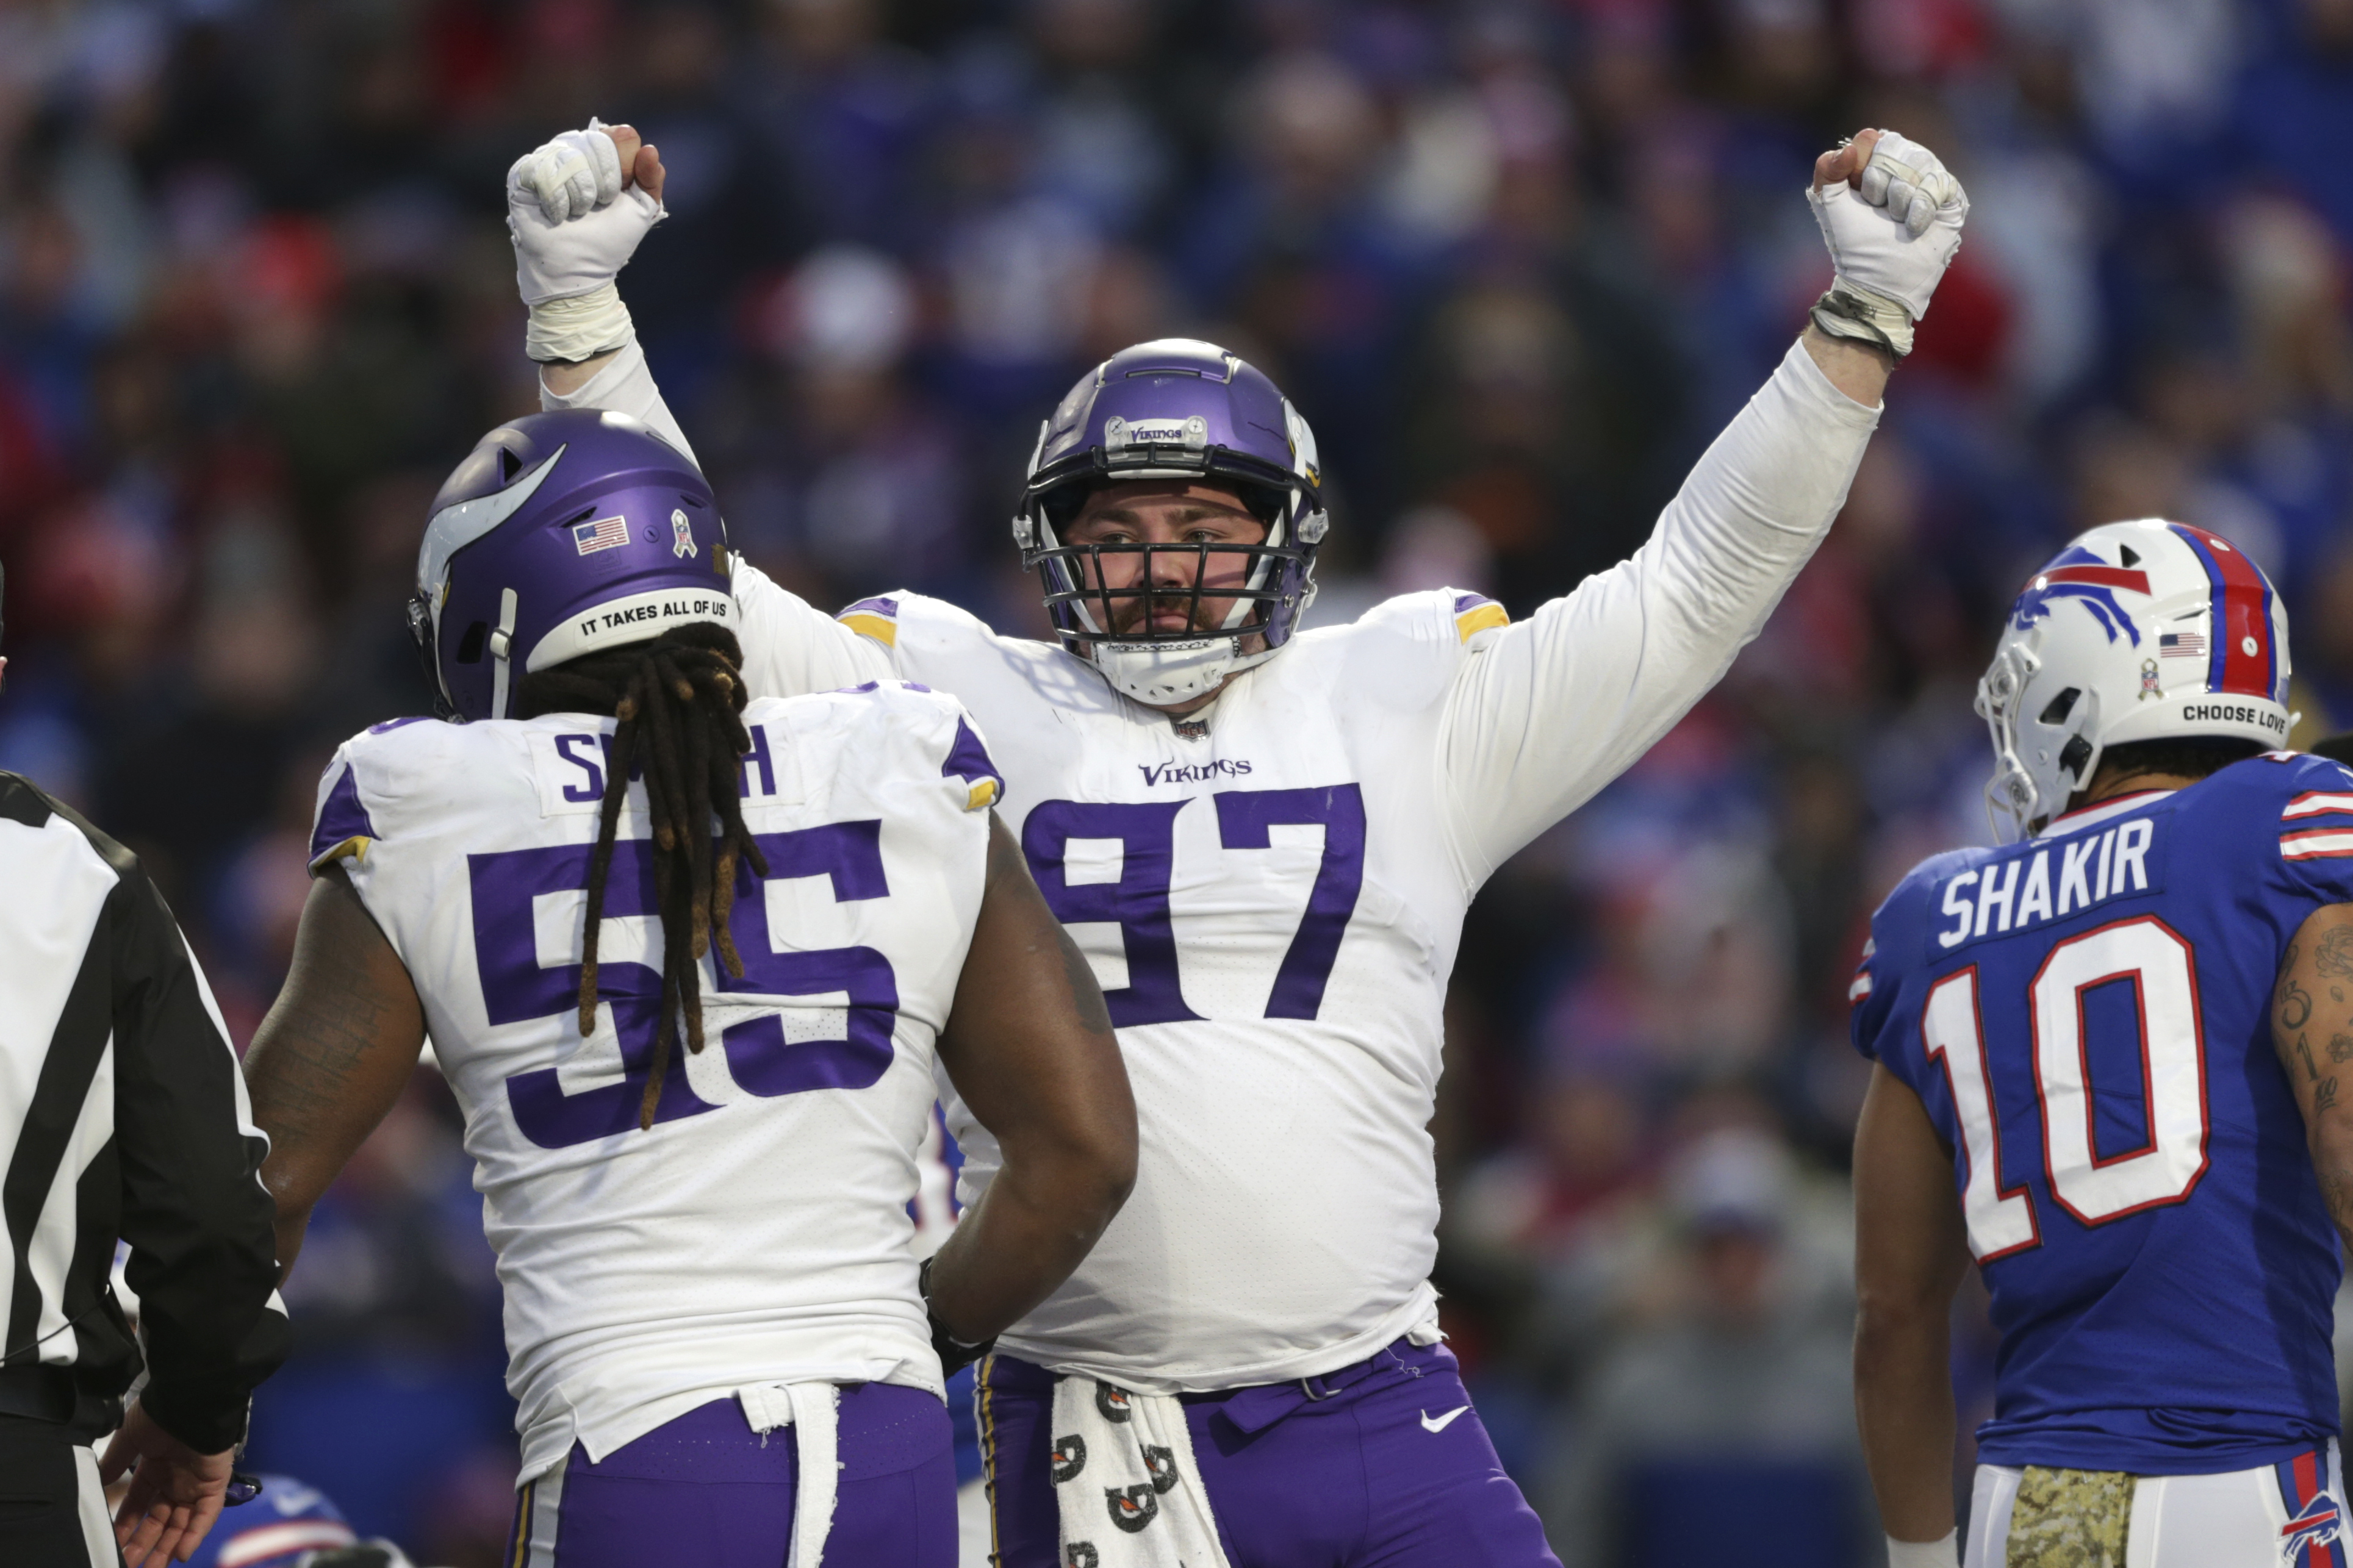 The Vikings are in control of the NFC North by a large margin